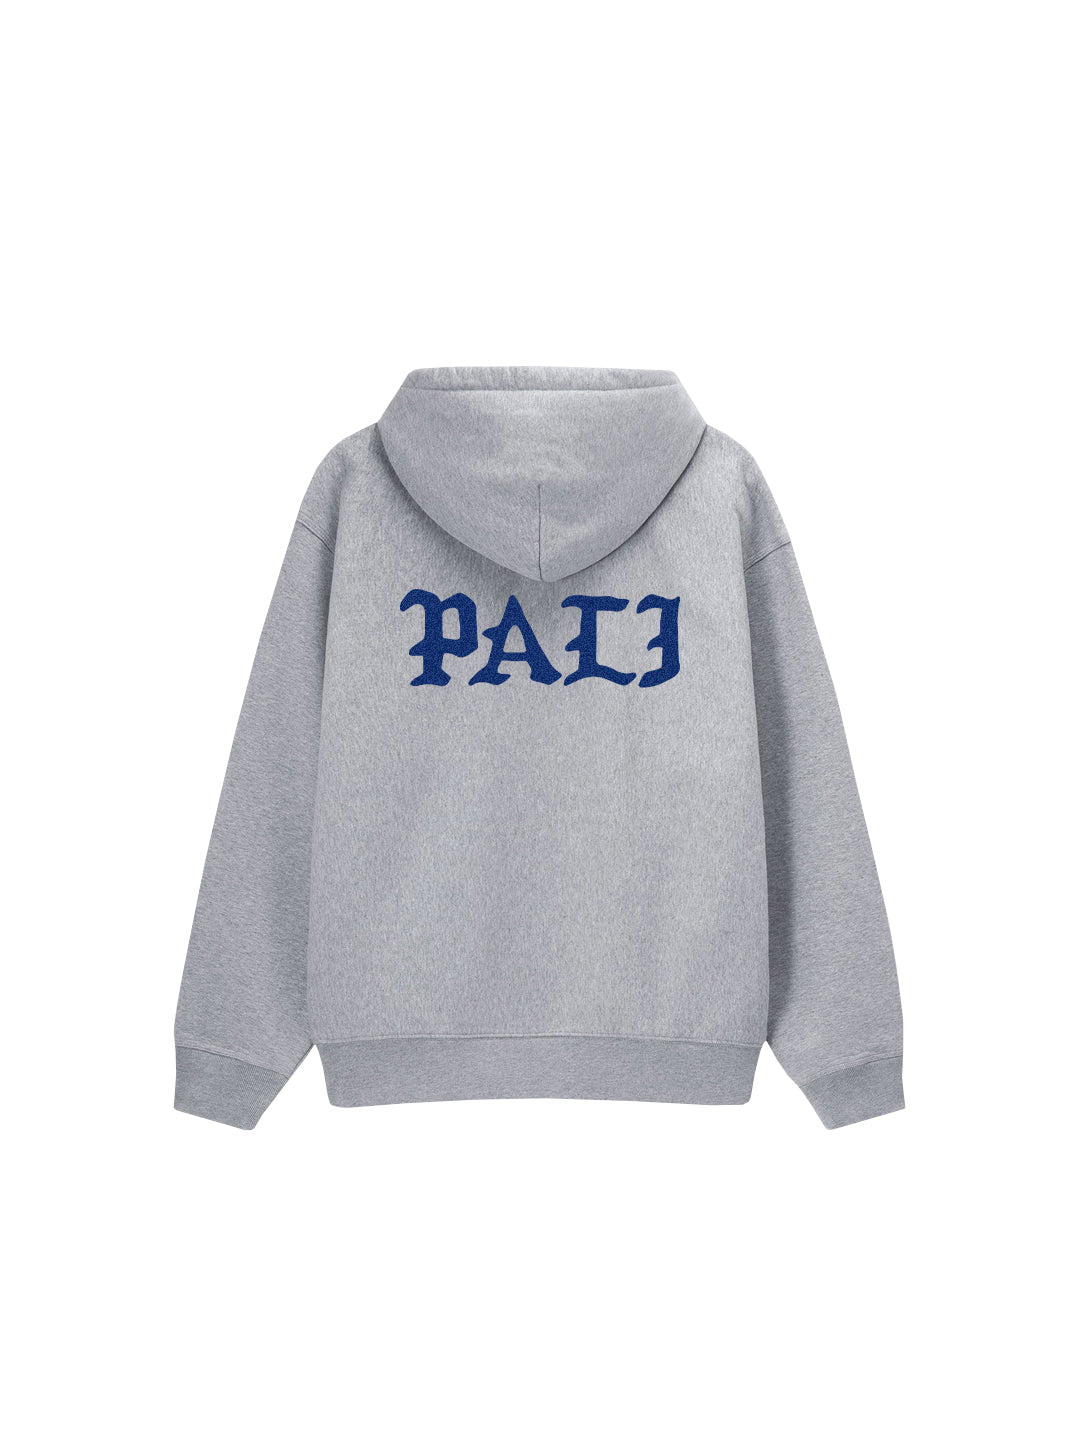 Chenille P Patch Hoodie in Heather Grey